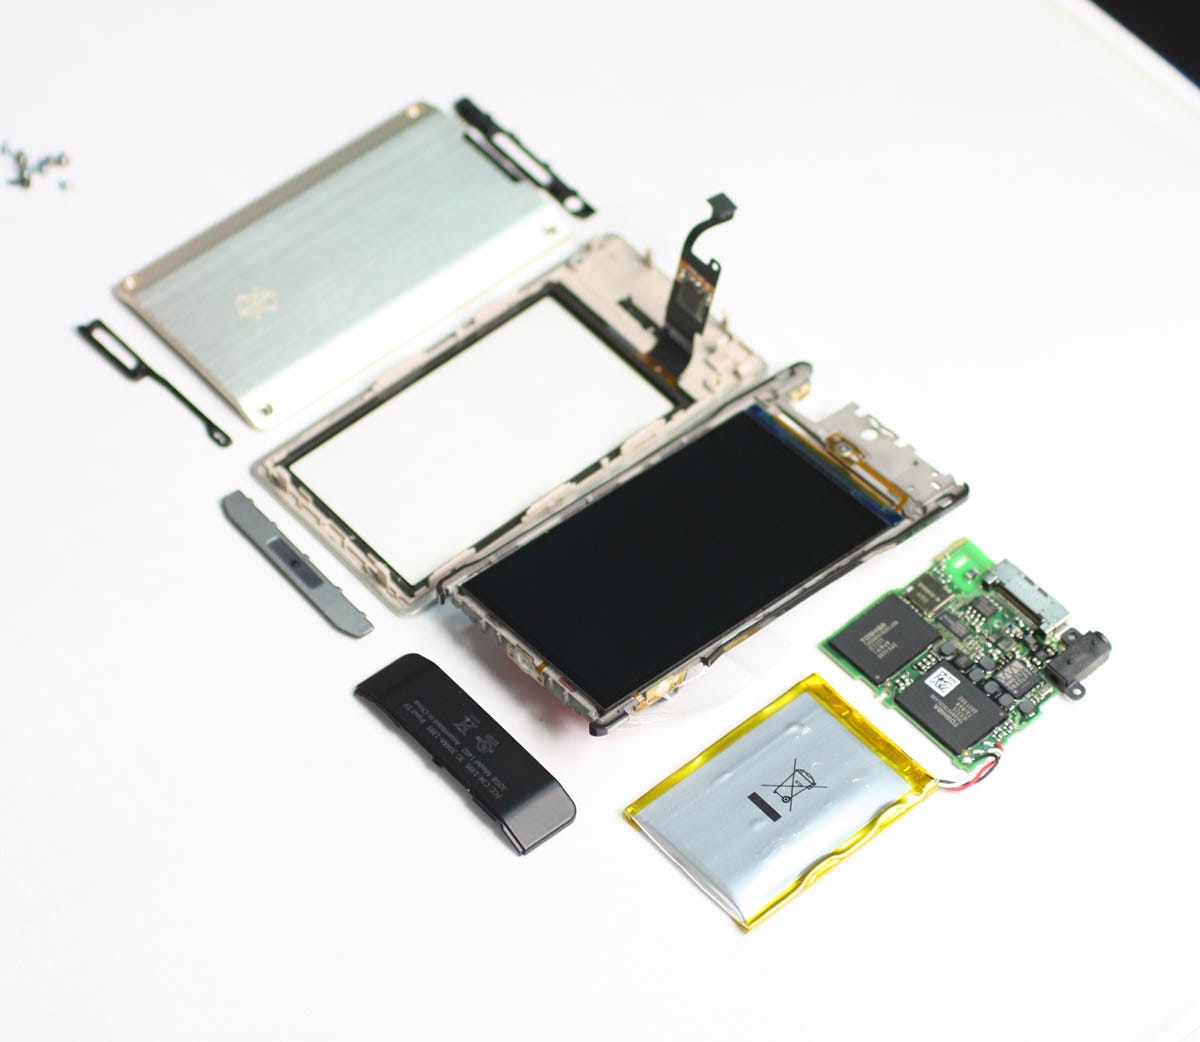 Photo of Zune HD open with parts showing.